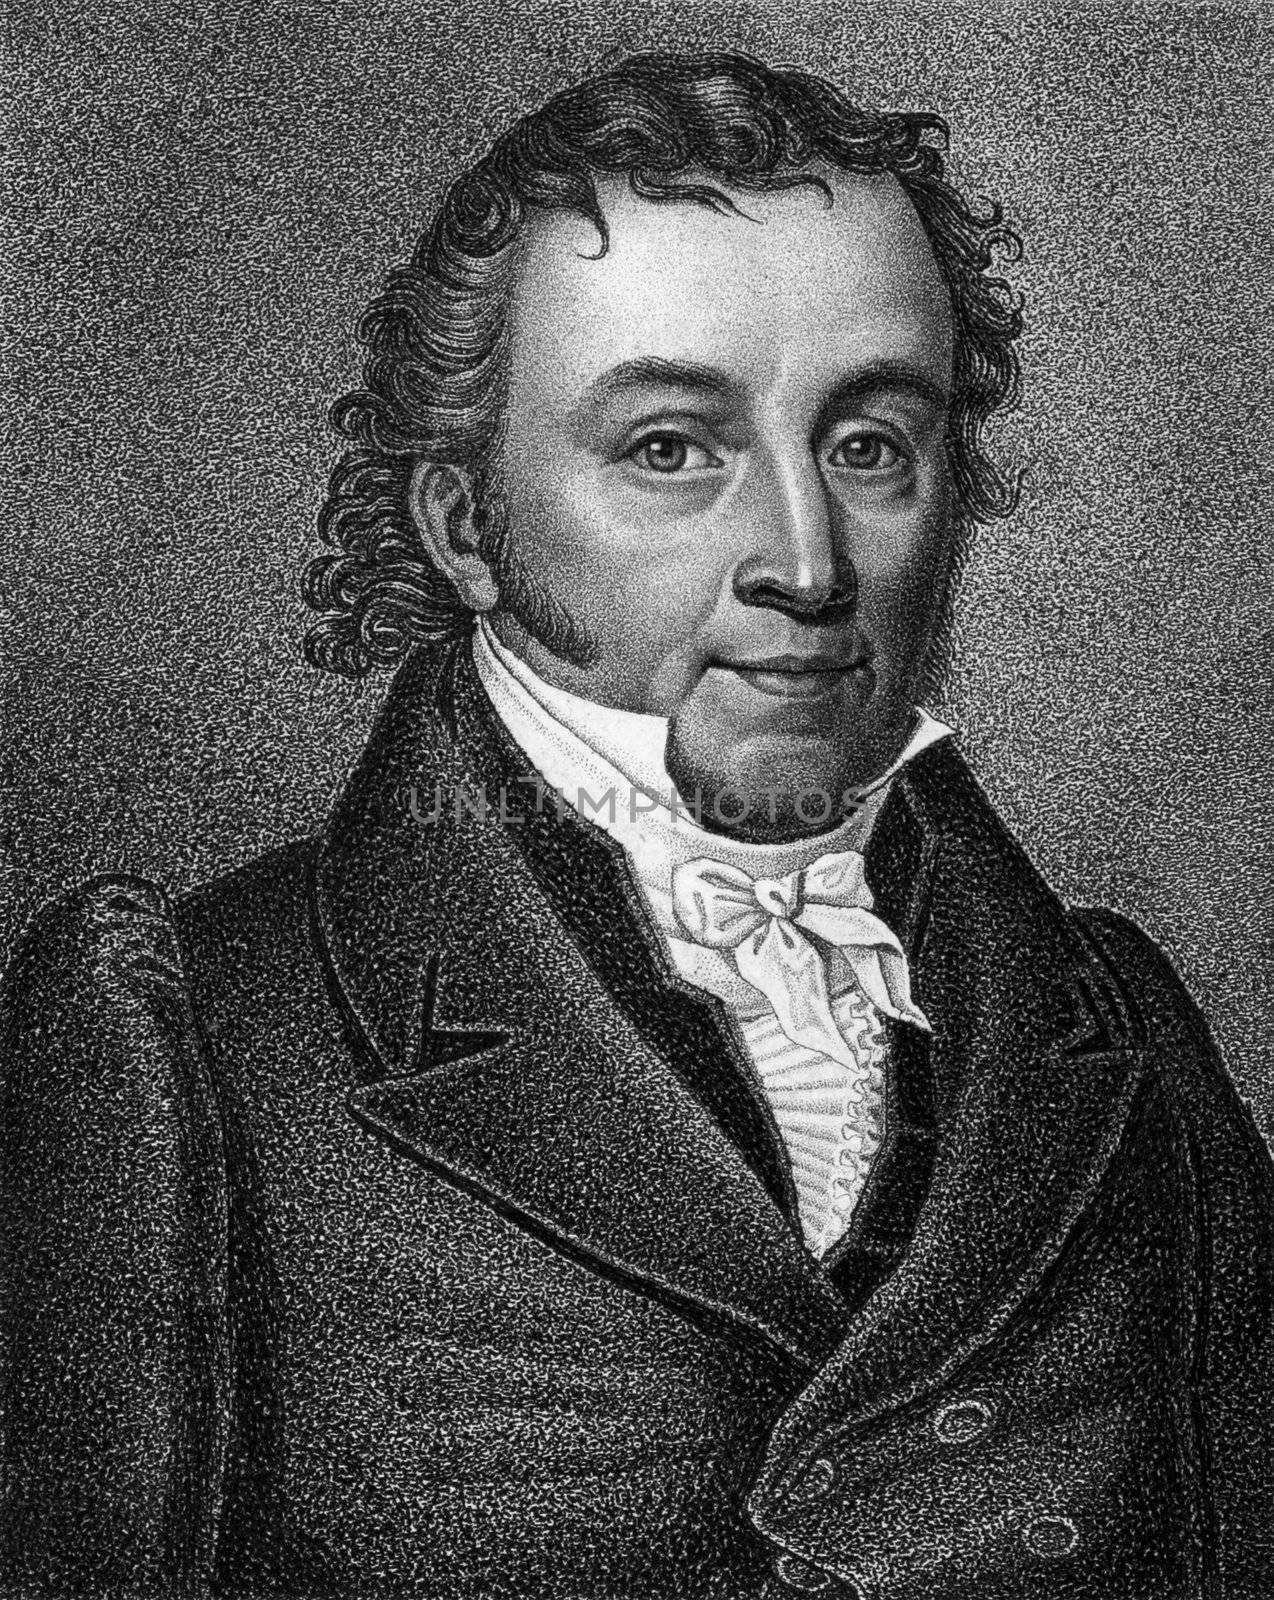 Mathias Fohrenbach (1766-1841) on engraving from 1859. German lawyer and politician. Engraved by unknown artist and published in Meyers Konversations-Lexikon, Germany,1859.